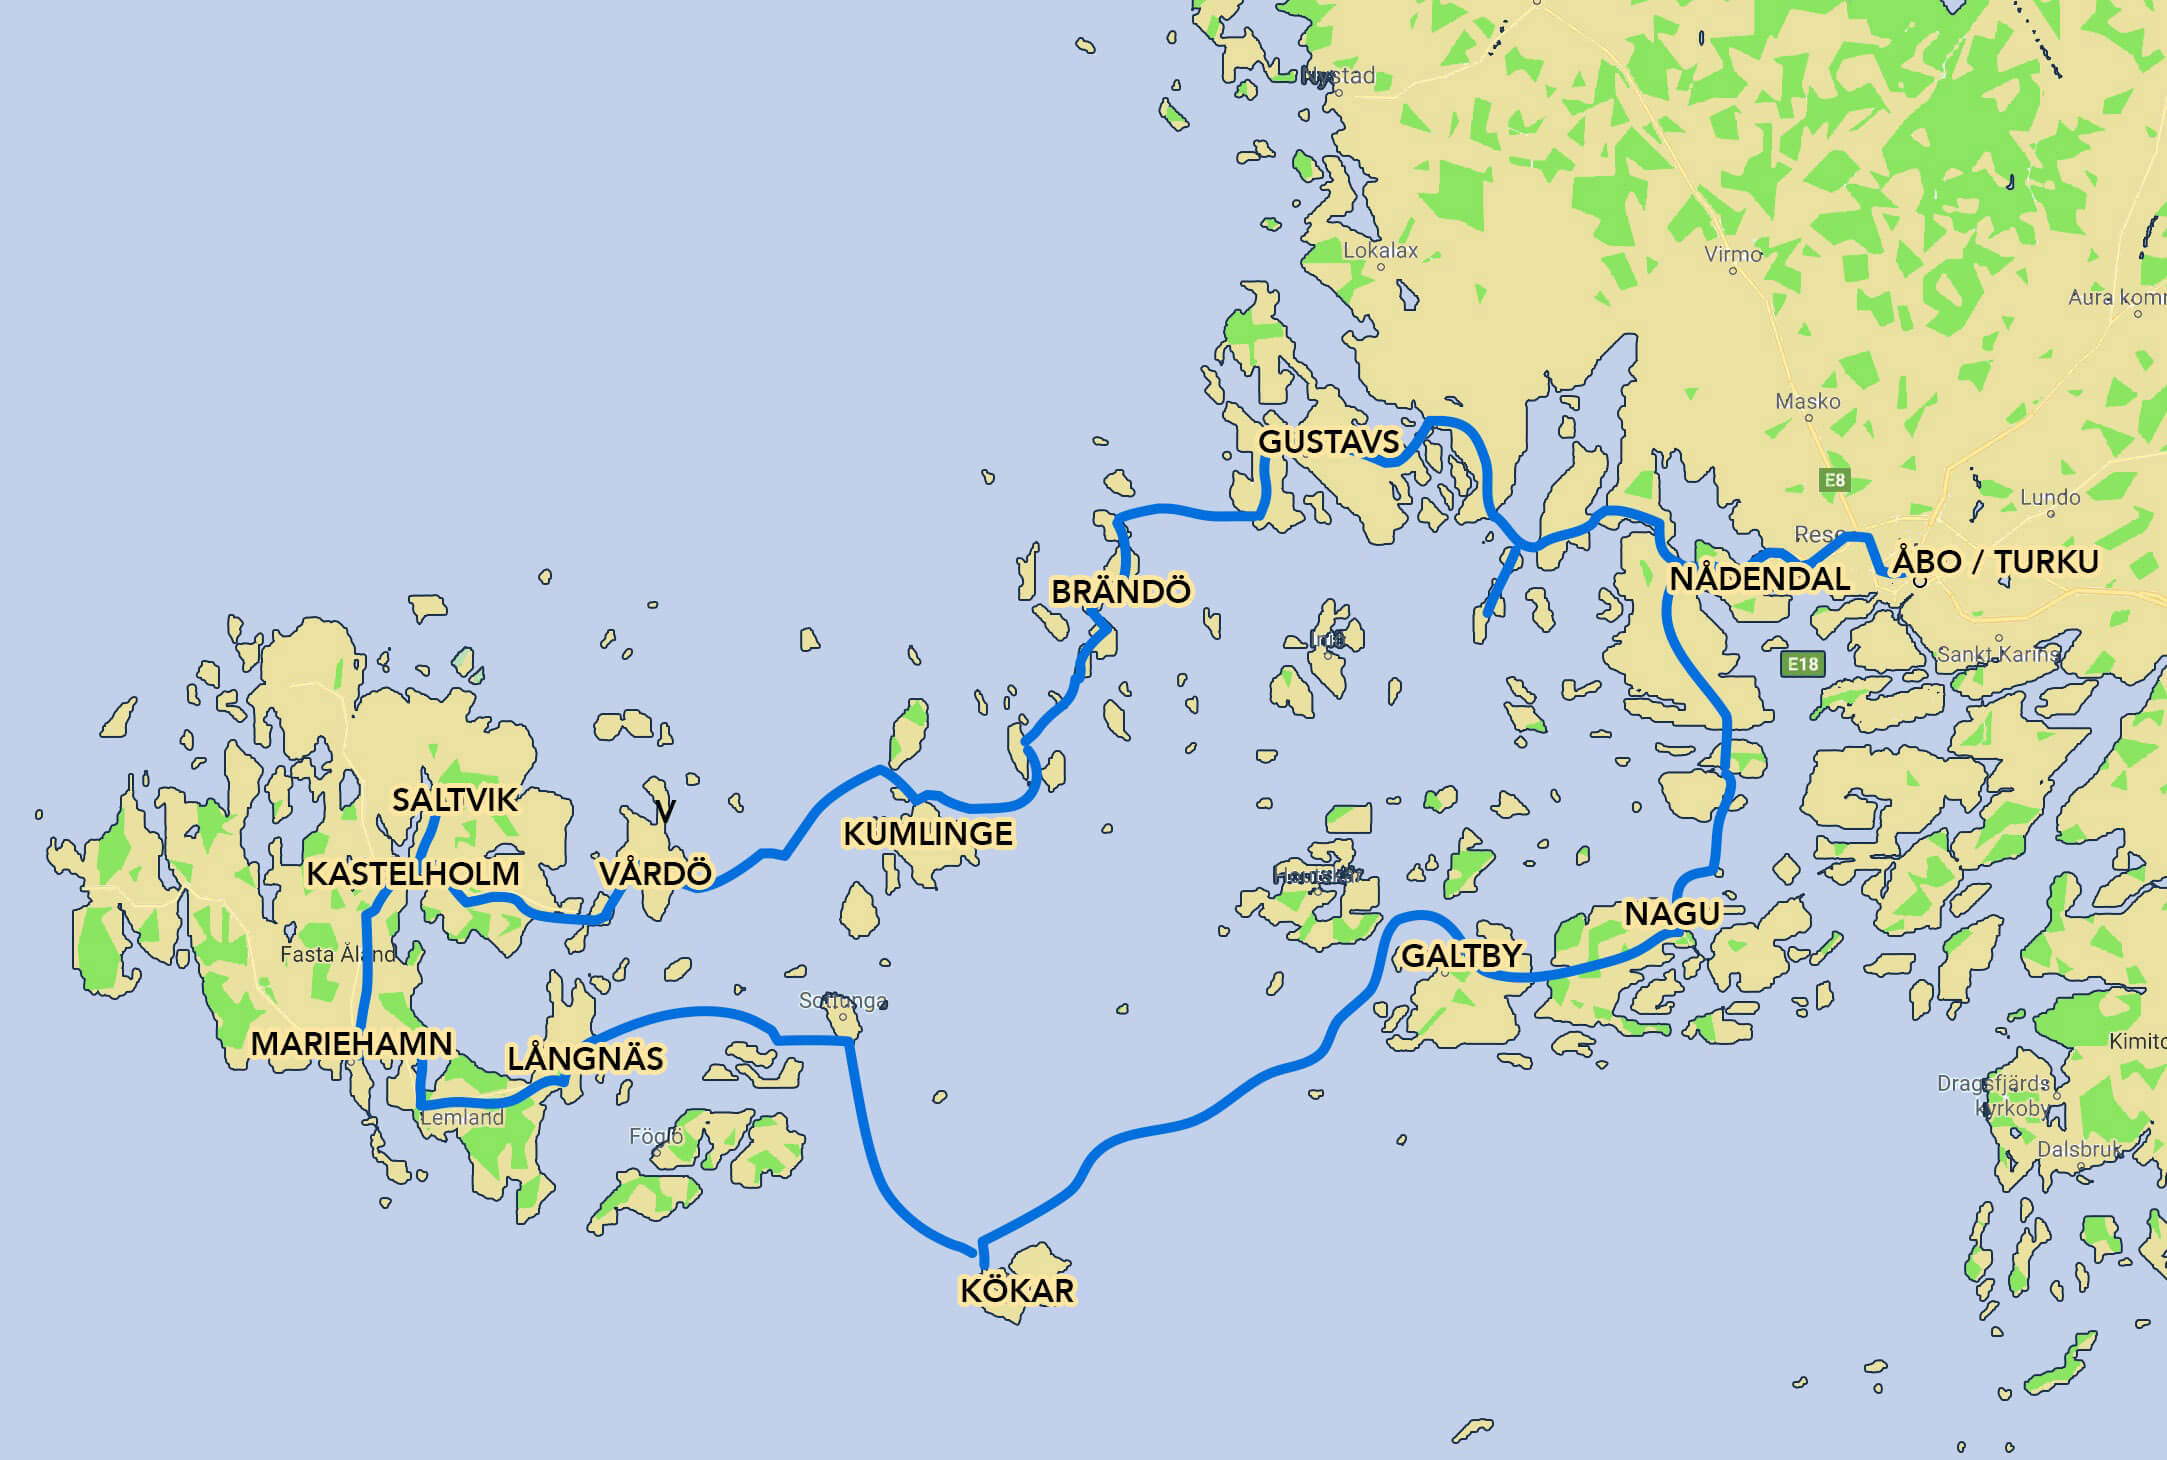 Bicycle tour map in Turku and Åland archipelago